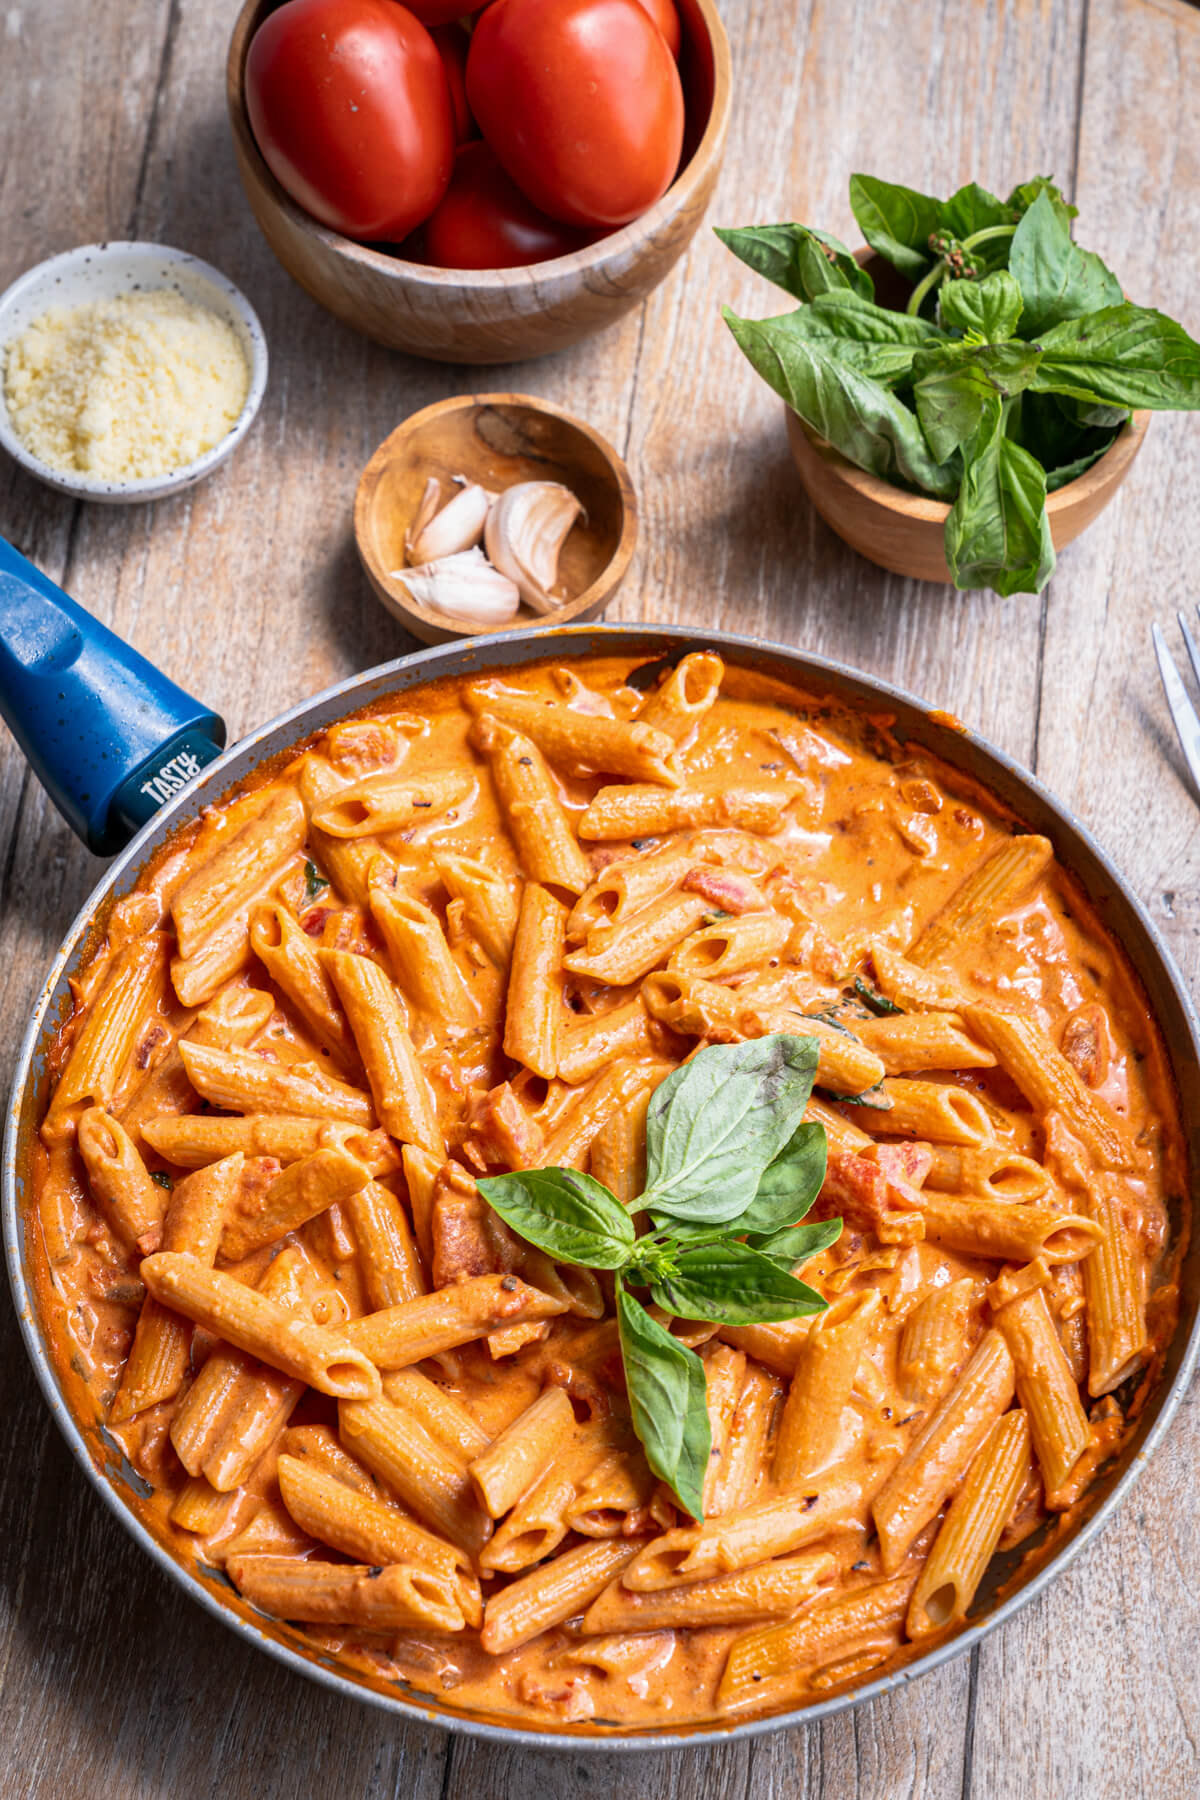 A skillet filled with penne pasta in Rosé sauce garnished with fresh basil leaves.